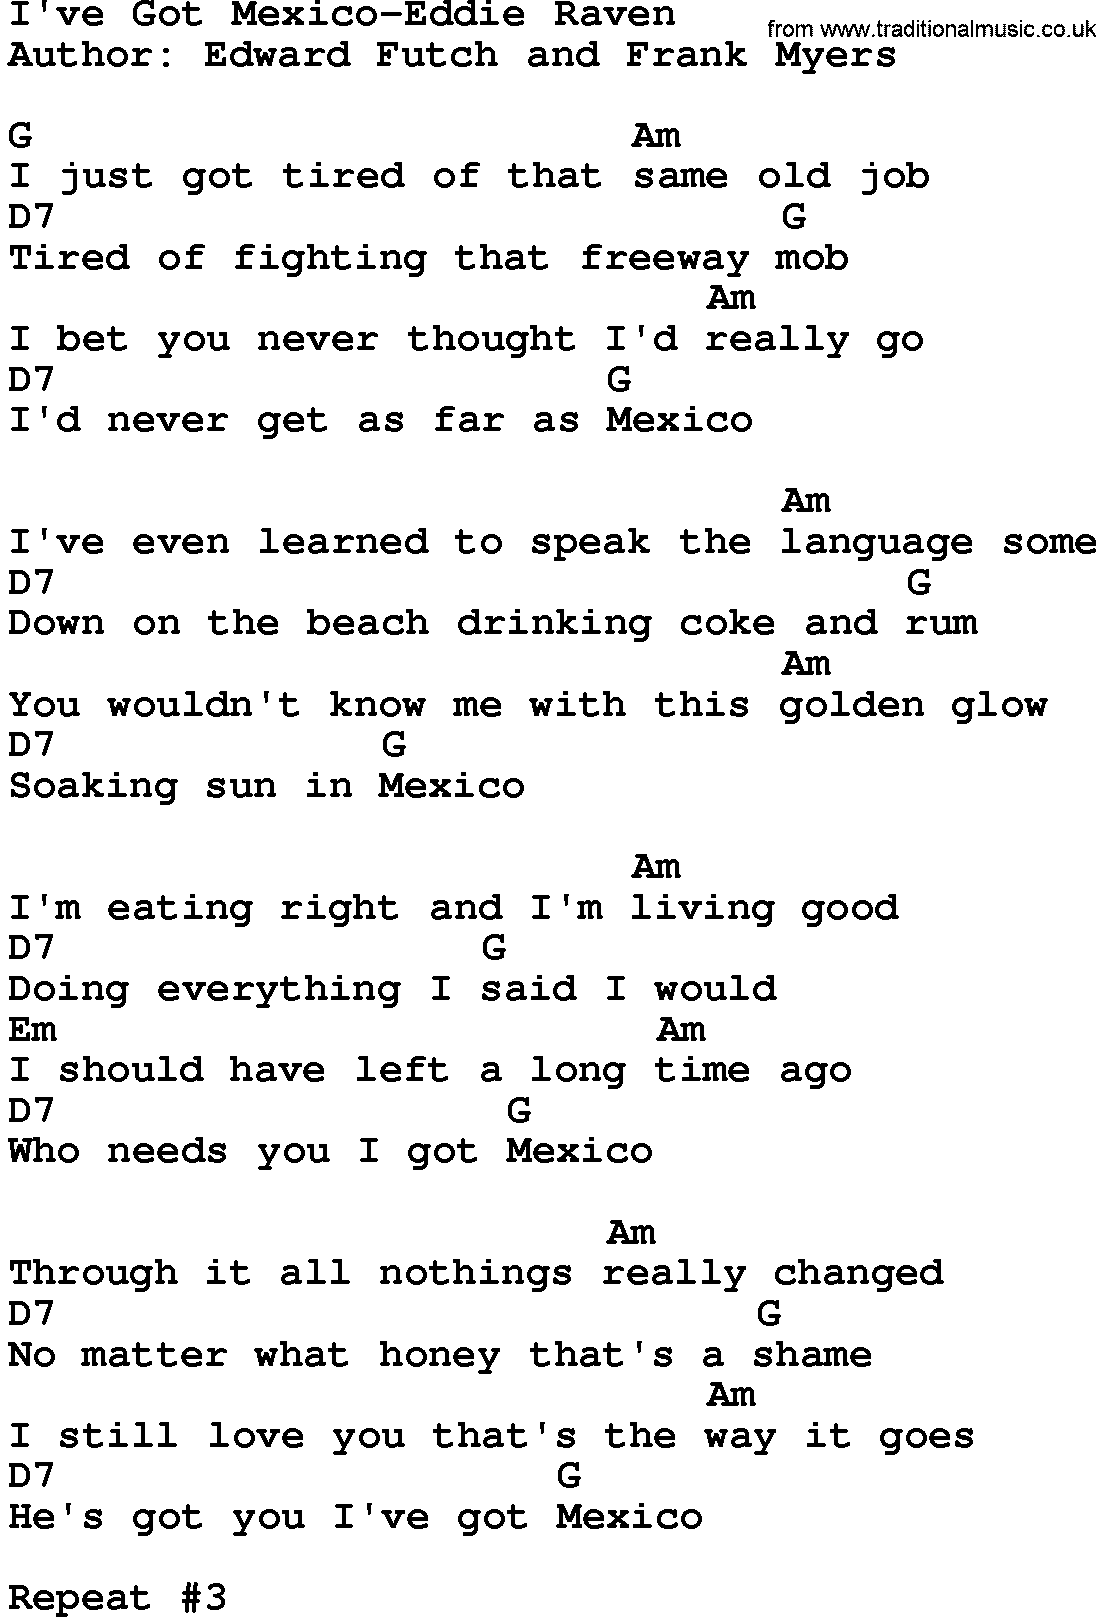 Country music song: I've Got Mexico-Eddie Raven lyrics and chords